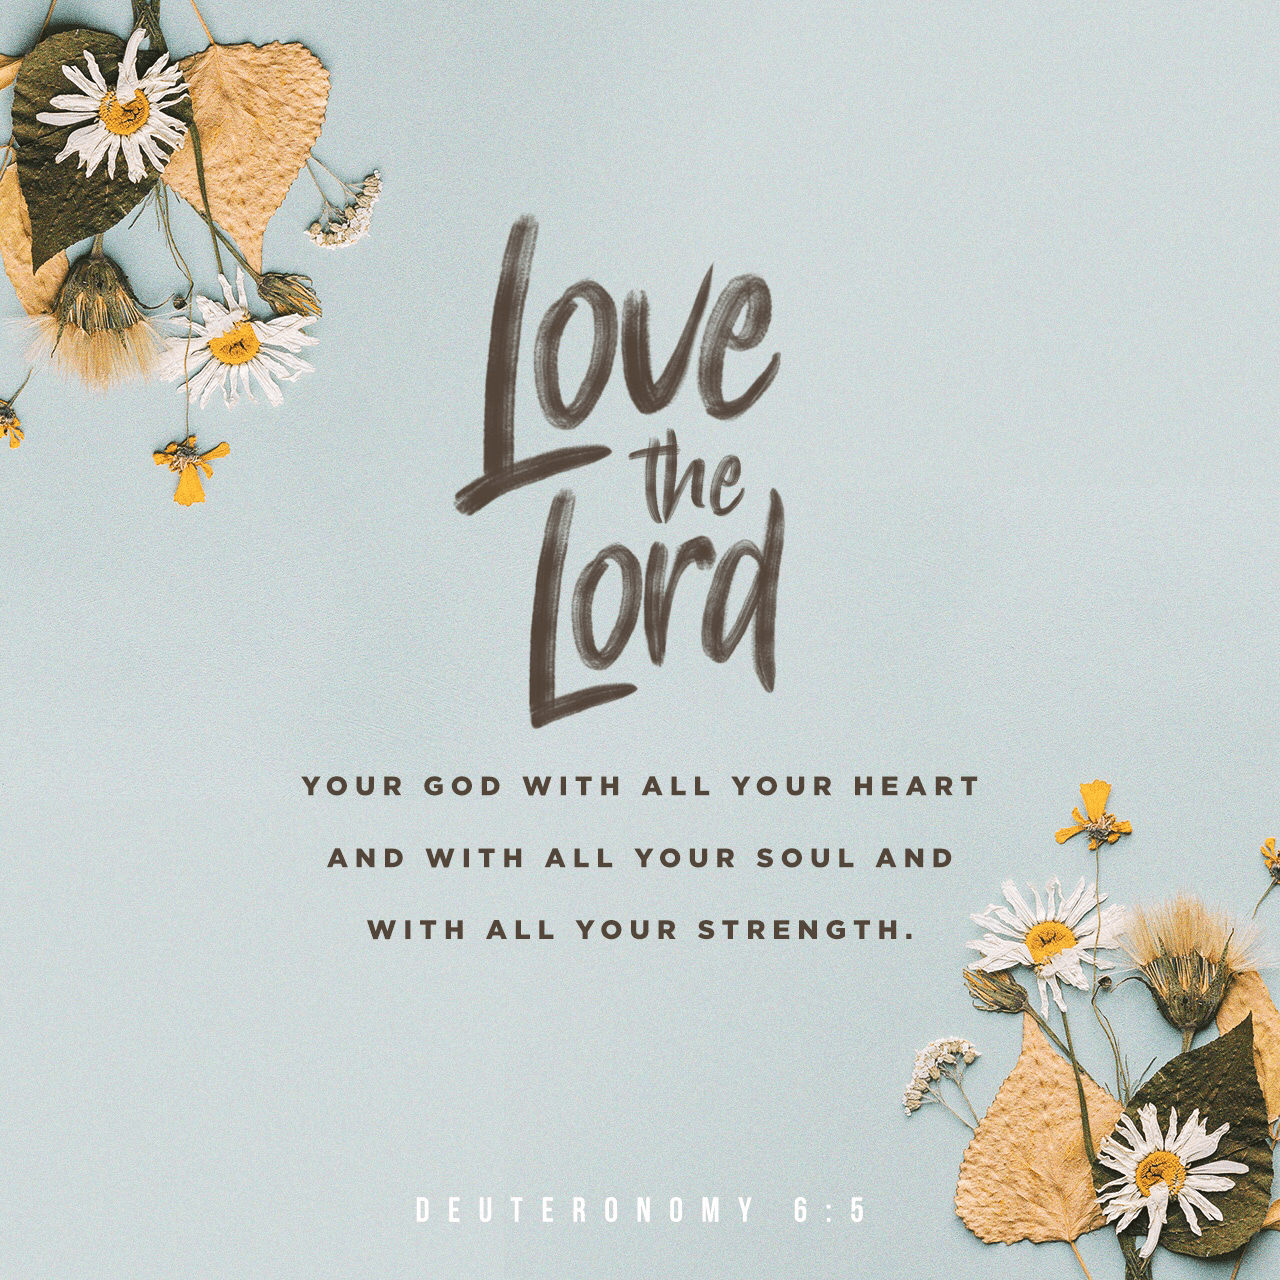 VOTD October 8 - “You shall love the LORD your God with all your heart and with all your soul and with all your might.”  ‭‭Deuteronomy‬ ‭6:5‬ ‭NASB‬‬ 